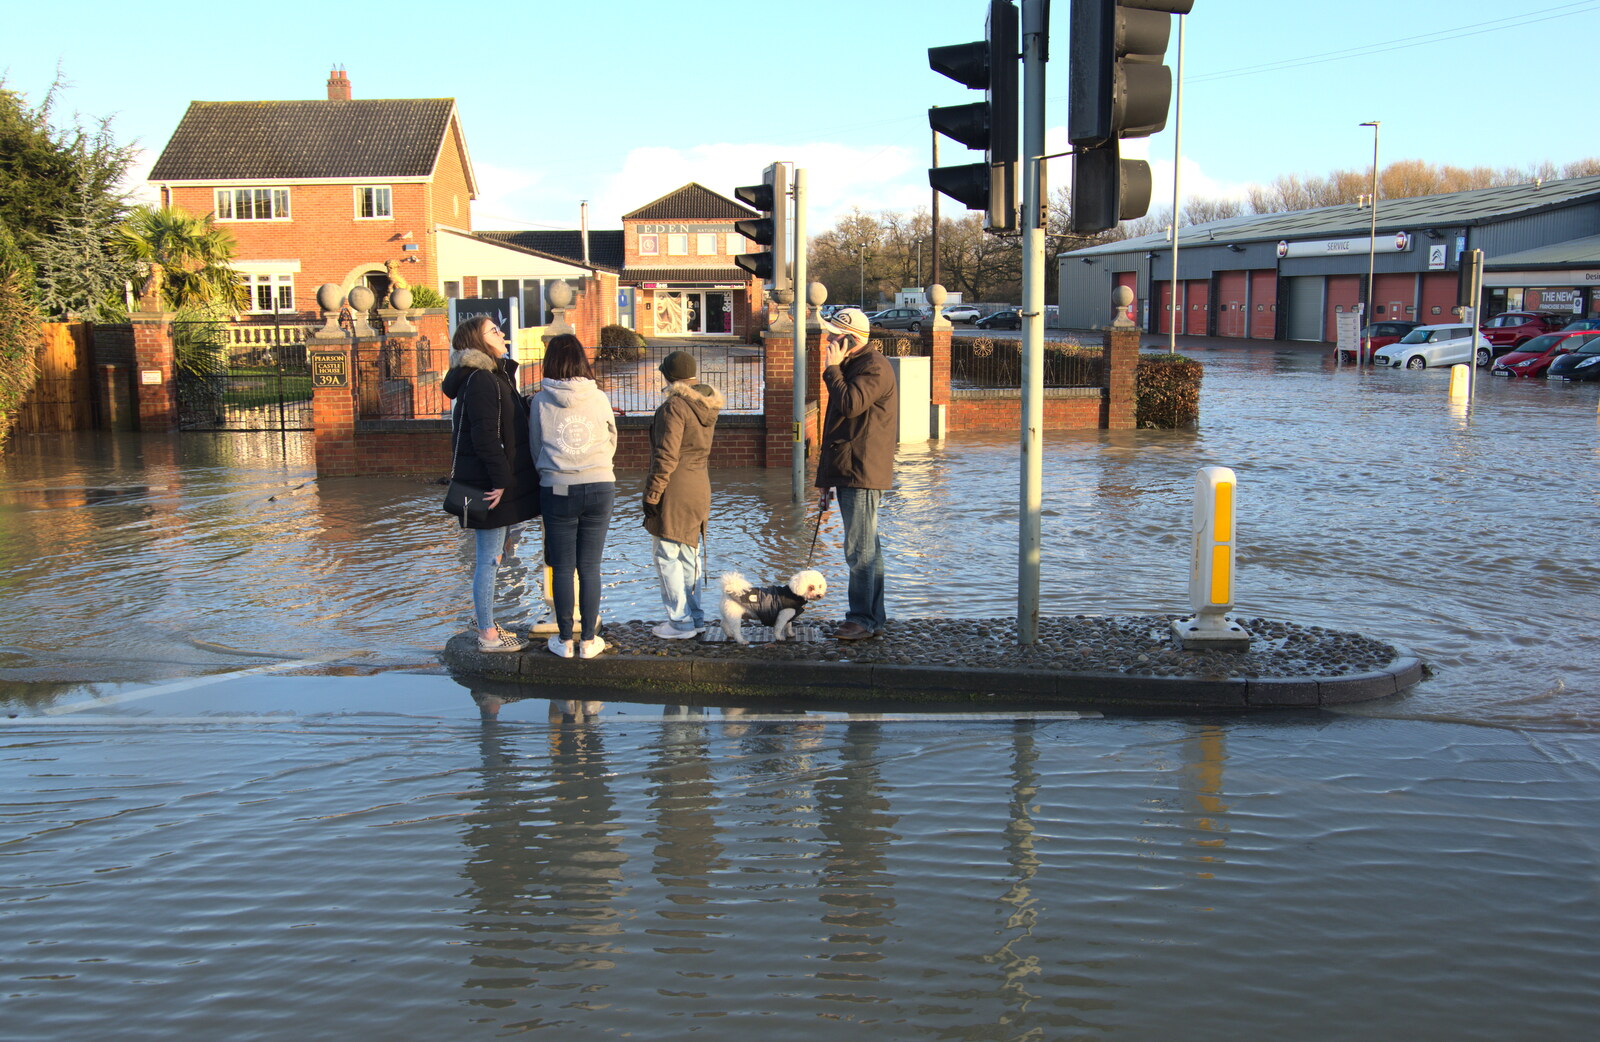 A traffic island becomes an actual island from The Christmas Eve Floods, Diss, Norfolk - 24th December 2020